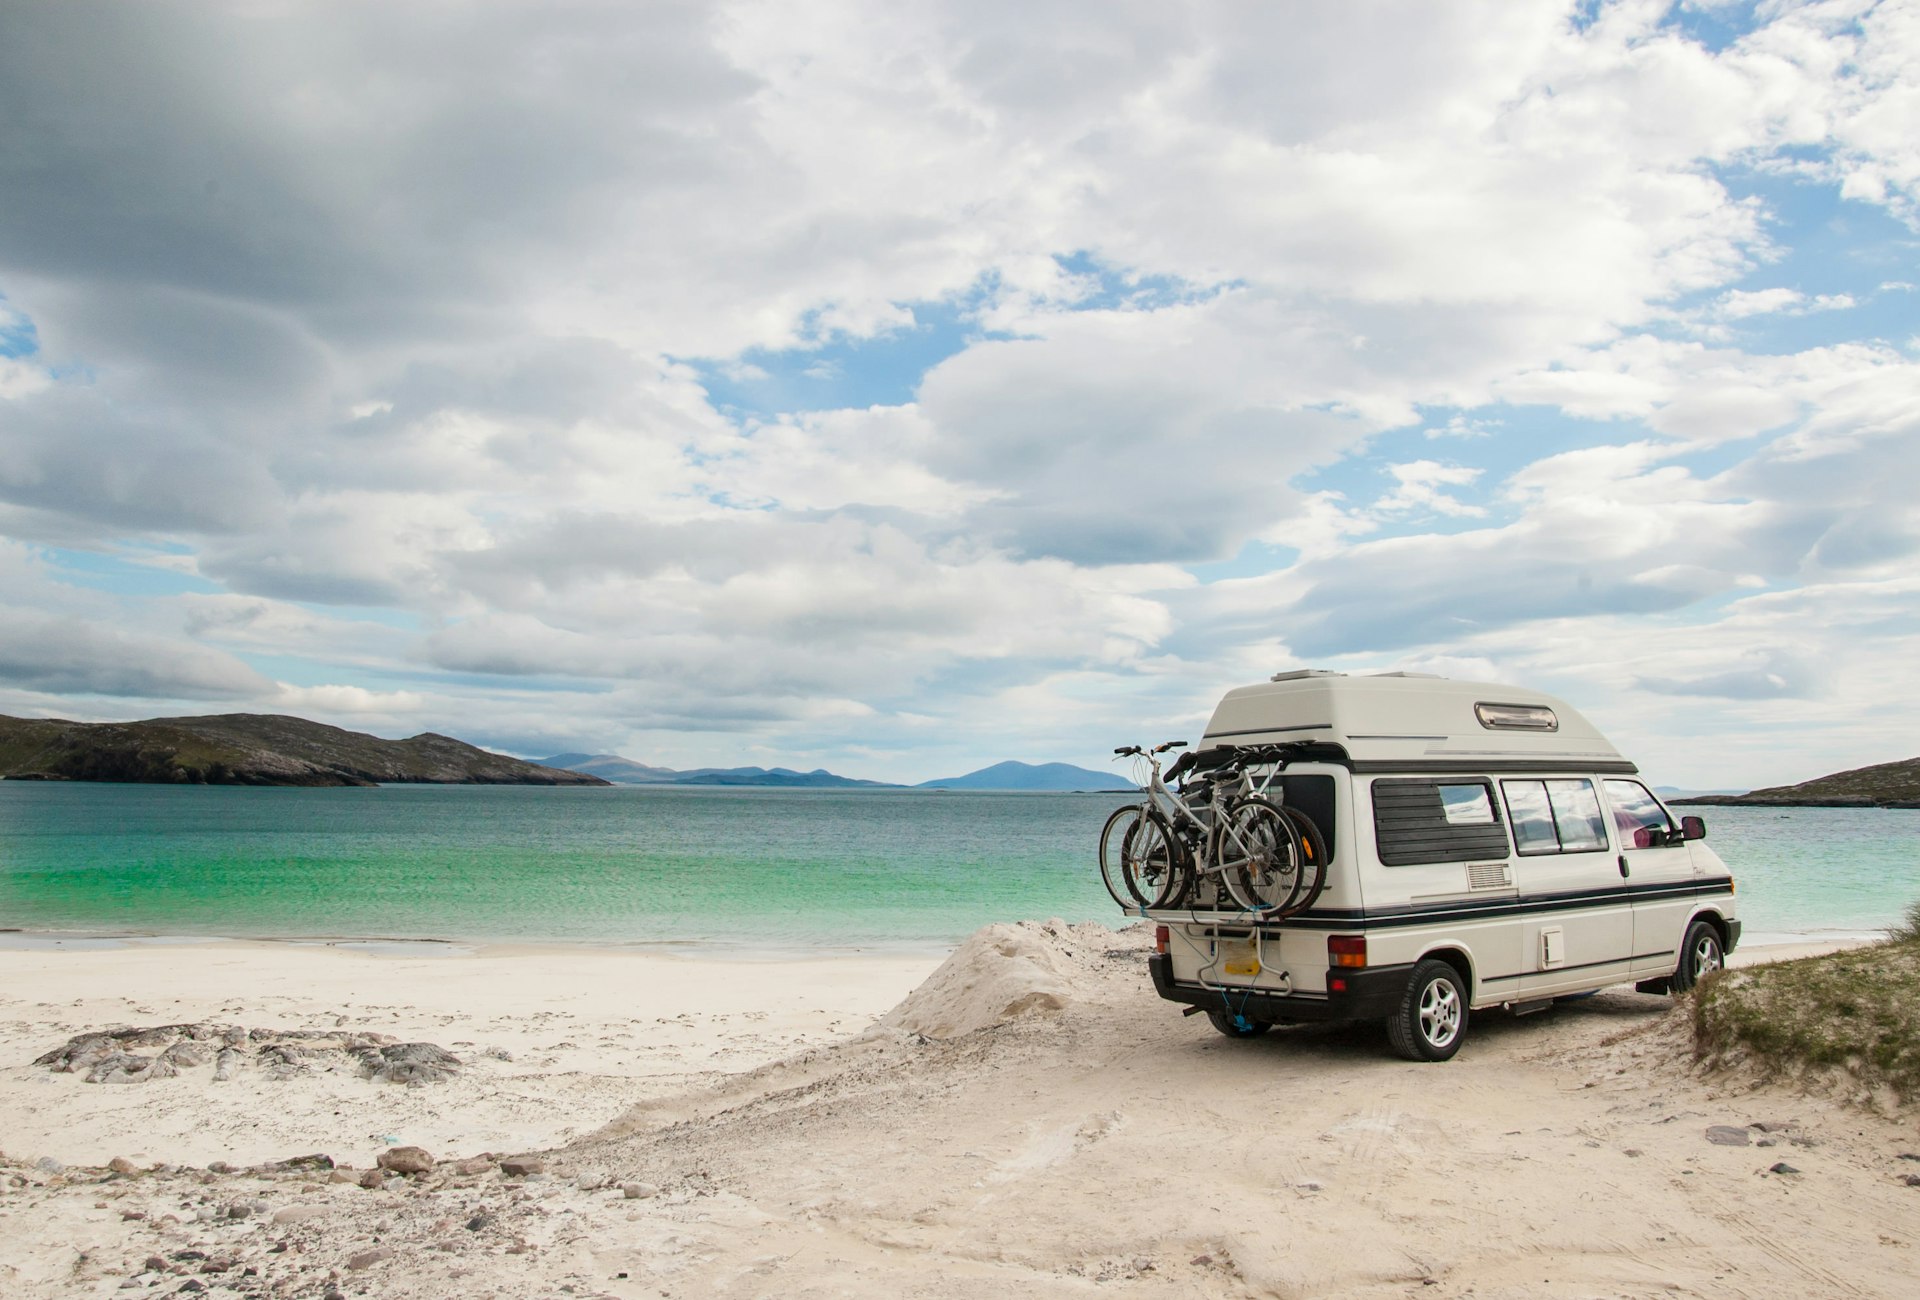 A blue VW campervan with two bikes on the back parked on a beach in Scotland